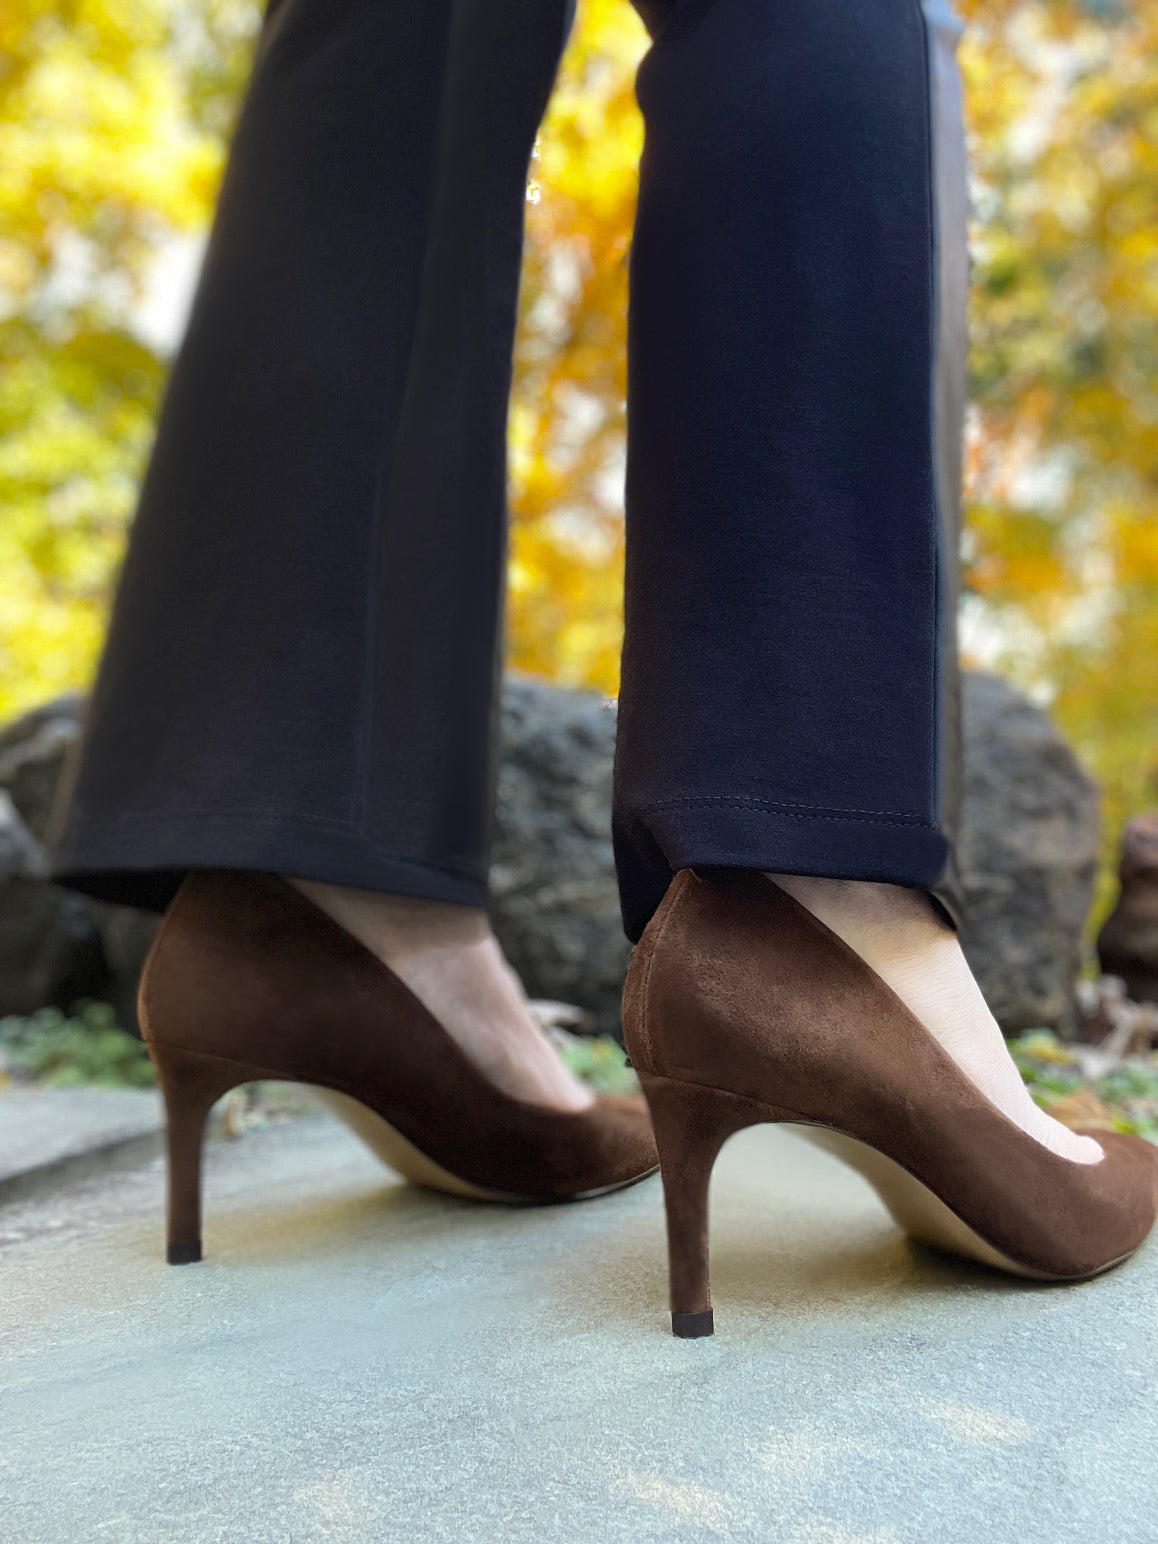 The arch support on this pointy-toe mid heel pump is just AMAZING!